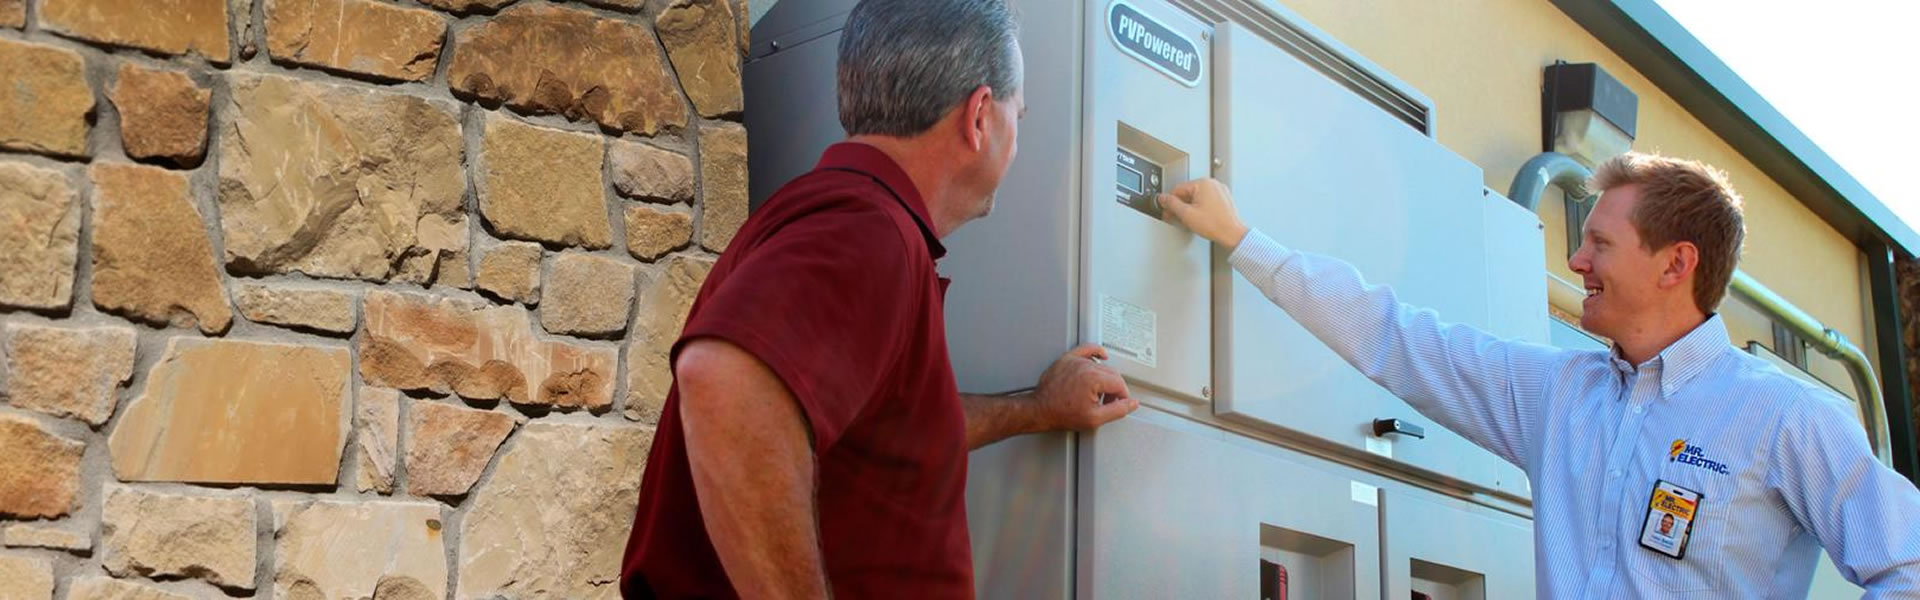 Electrical Panel Replacement in Lakewood, TX